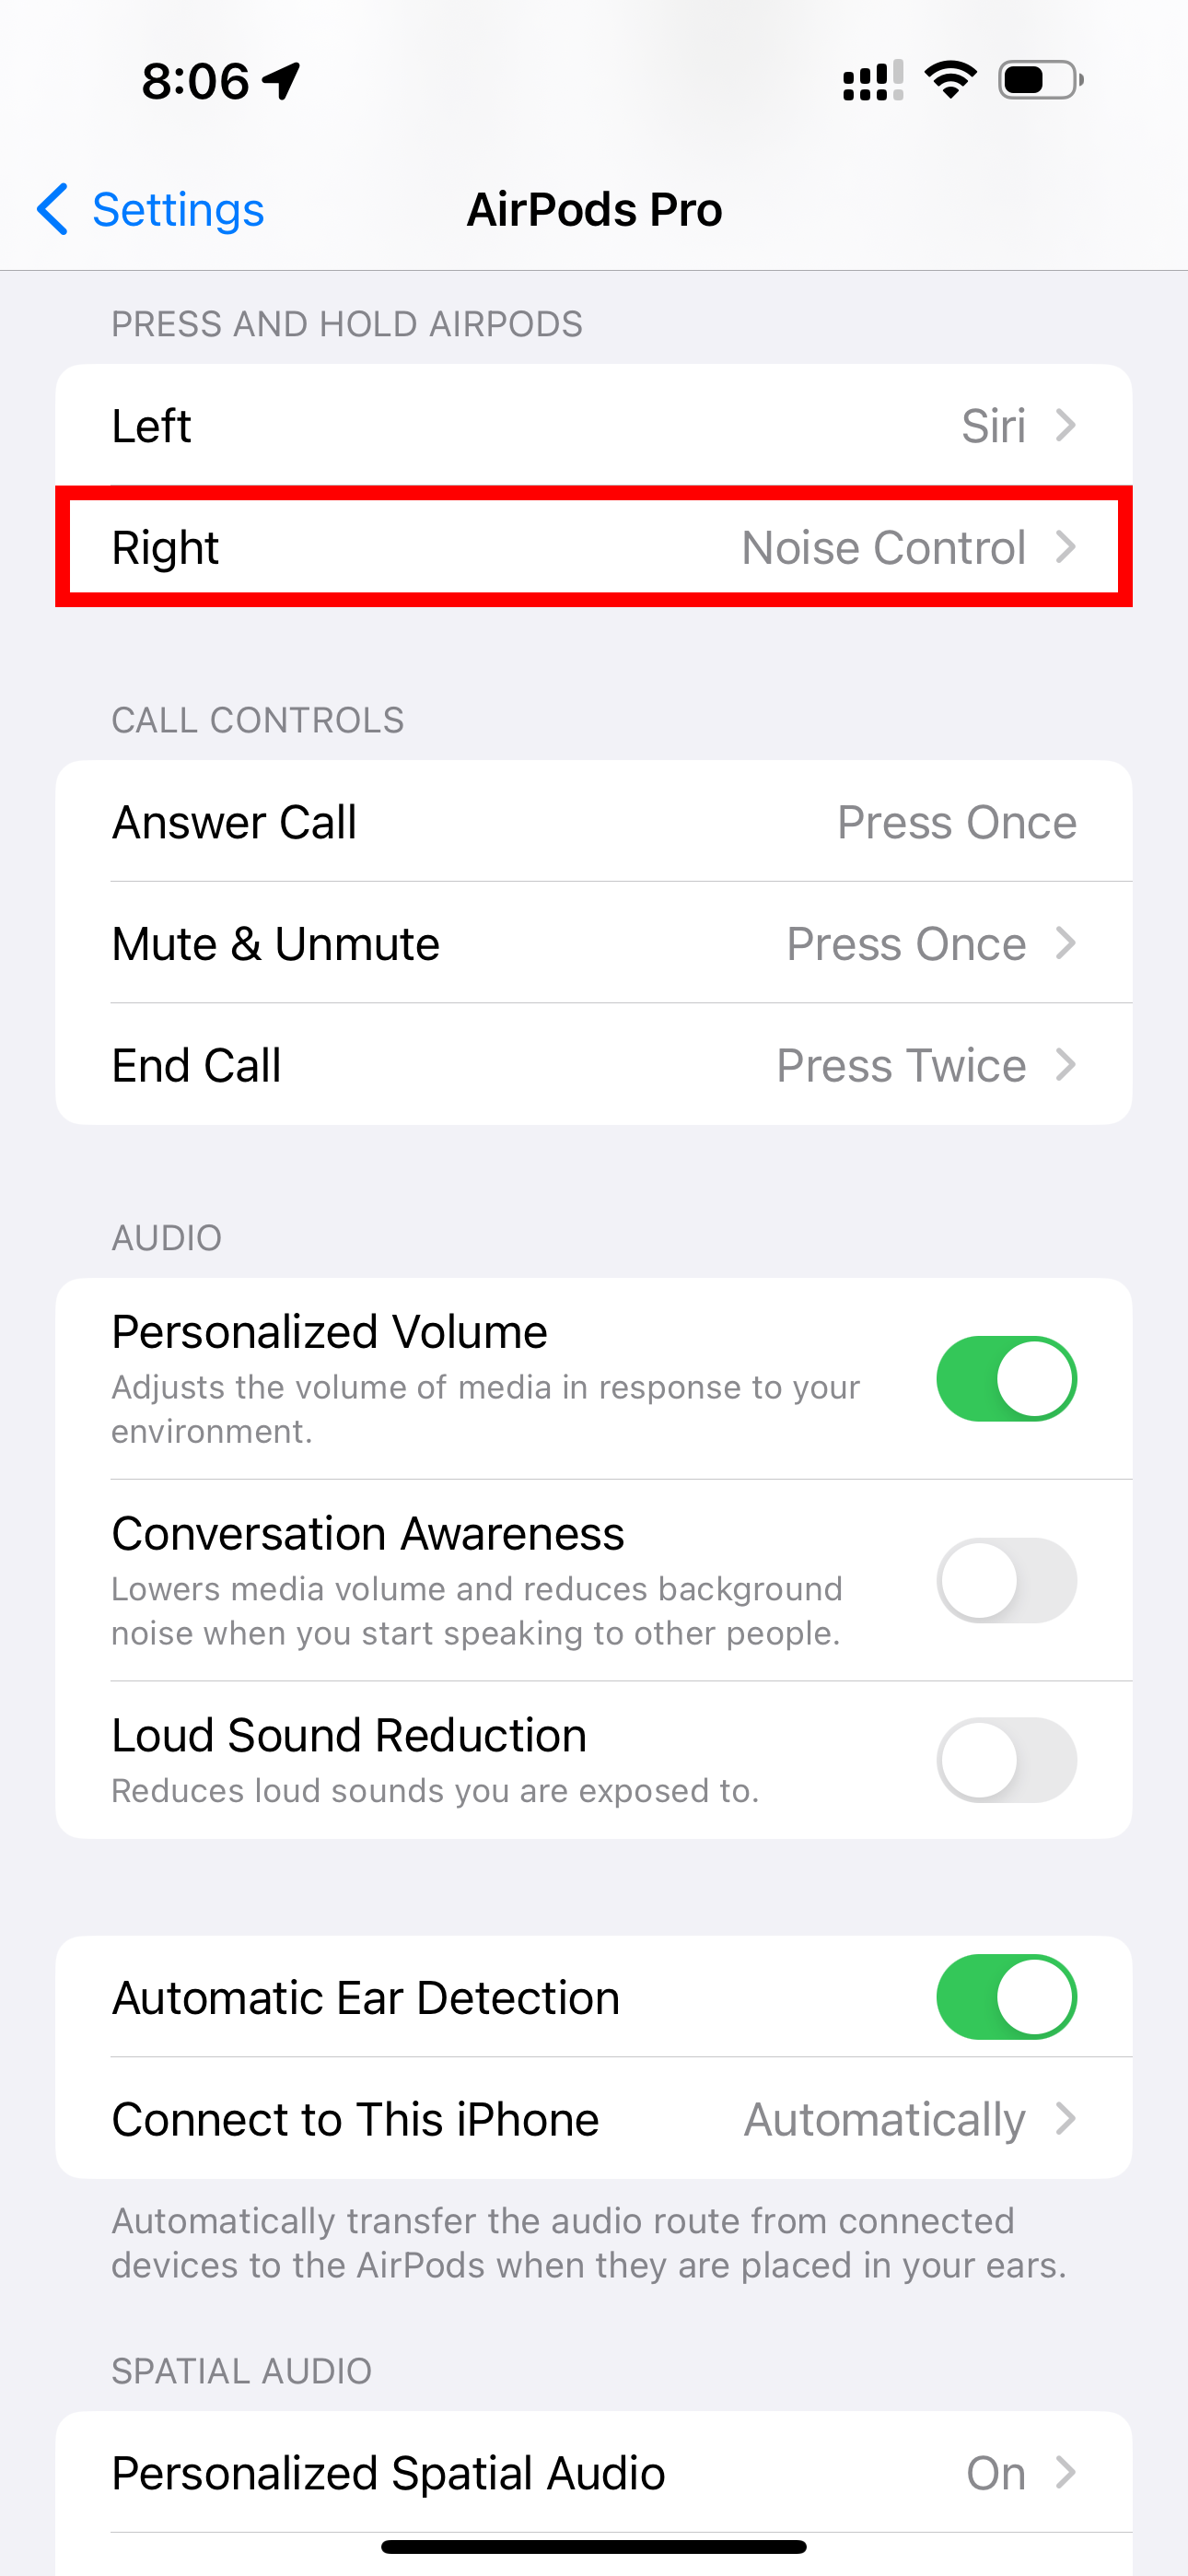 AirPods settings on iPhone highlighting the Right AirPod option in the Press and Hold section.